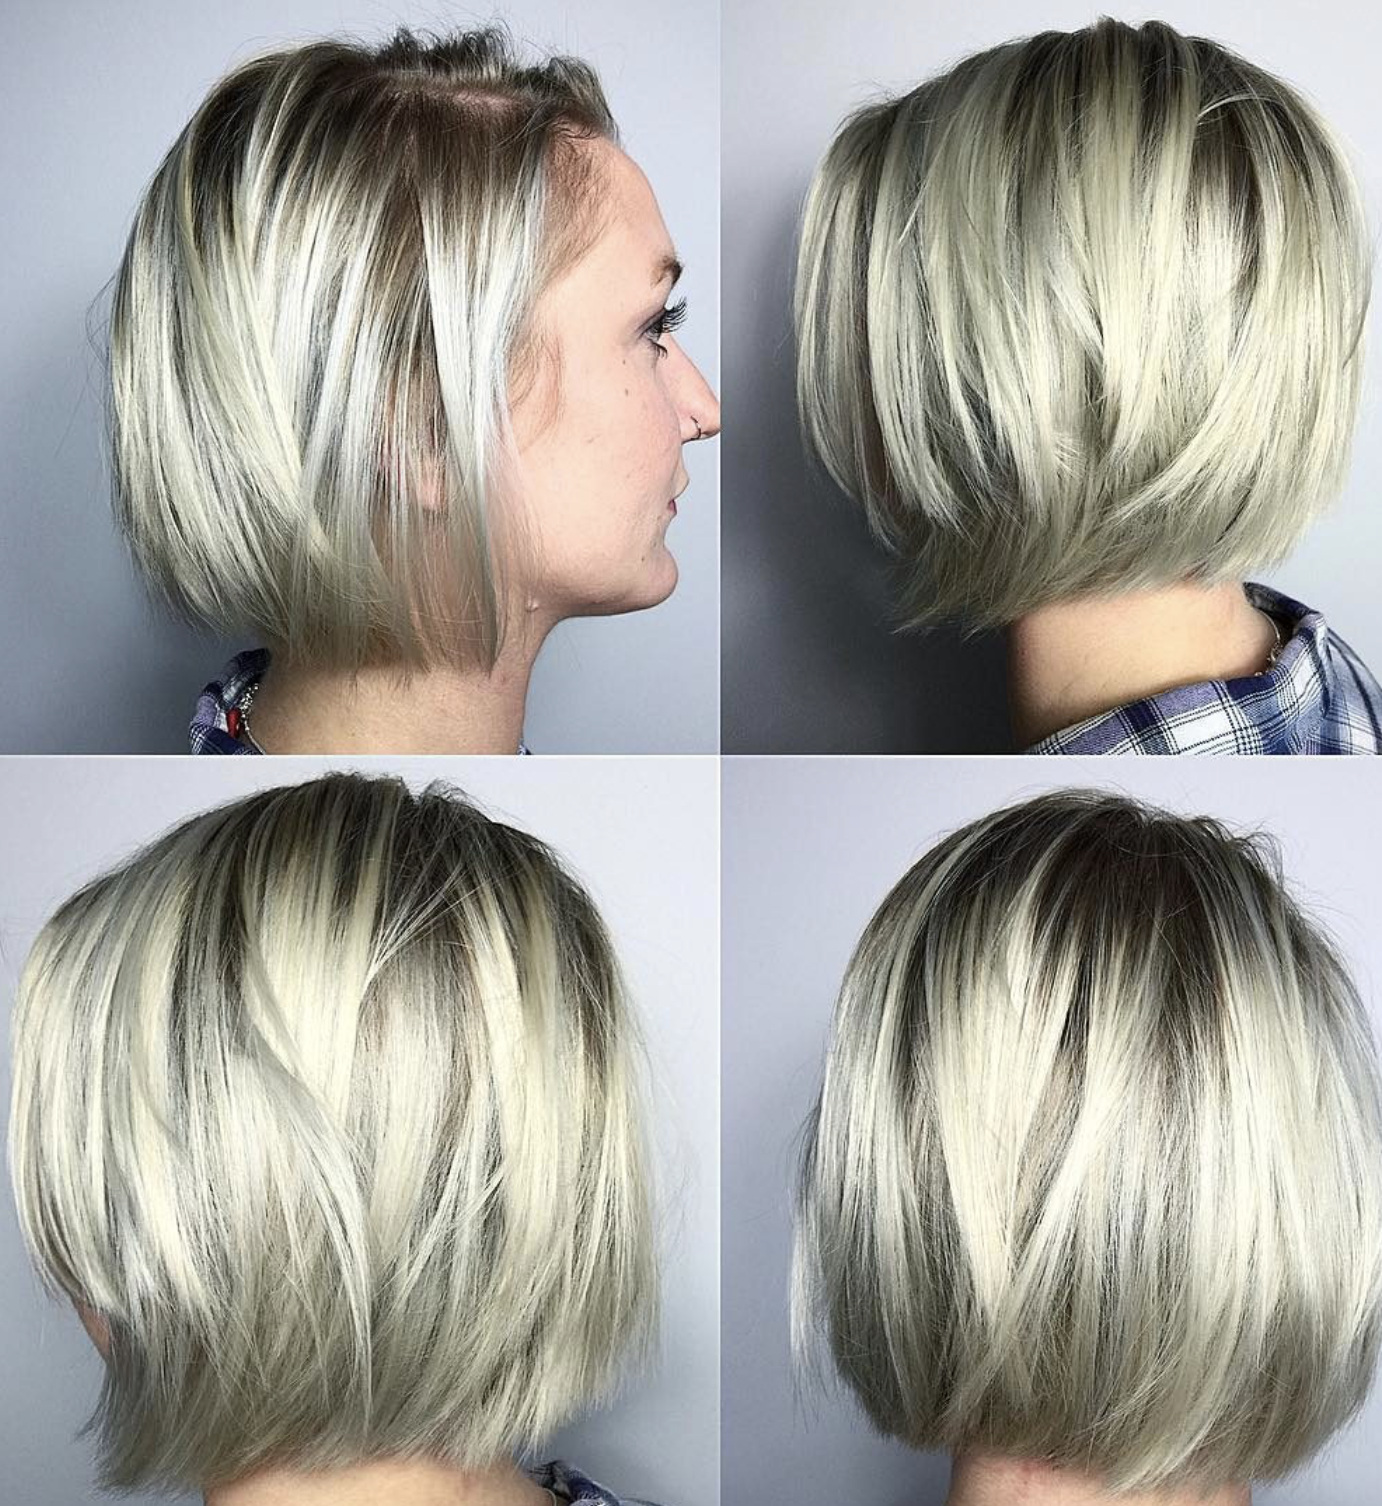 Short Bob Hairstyle For Fine Hair 2019 You Must Try